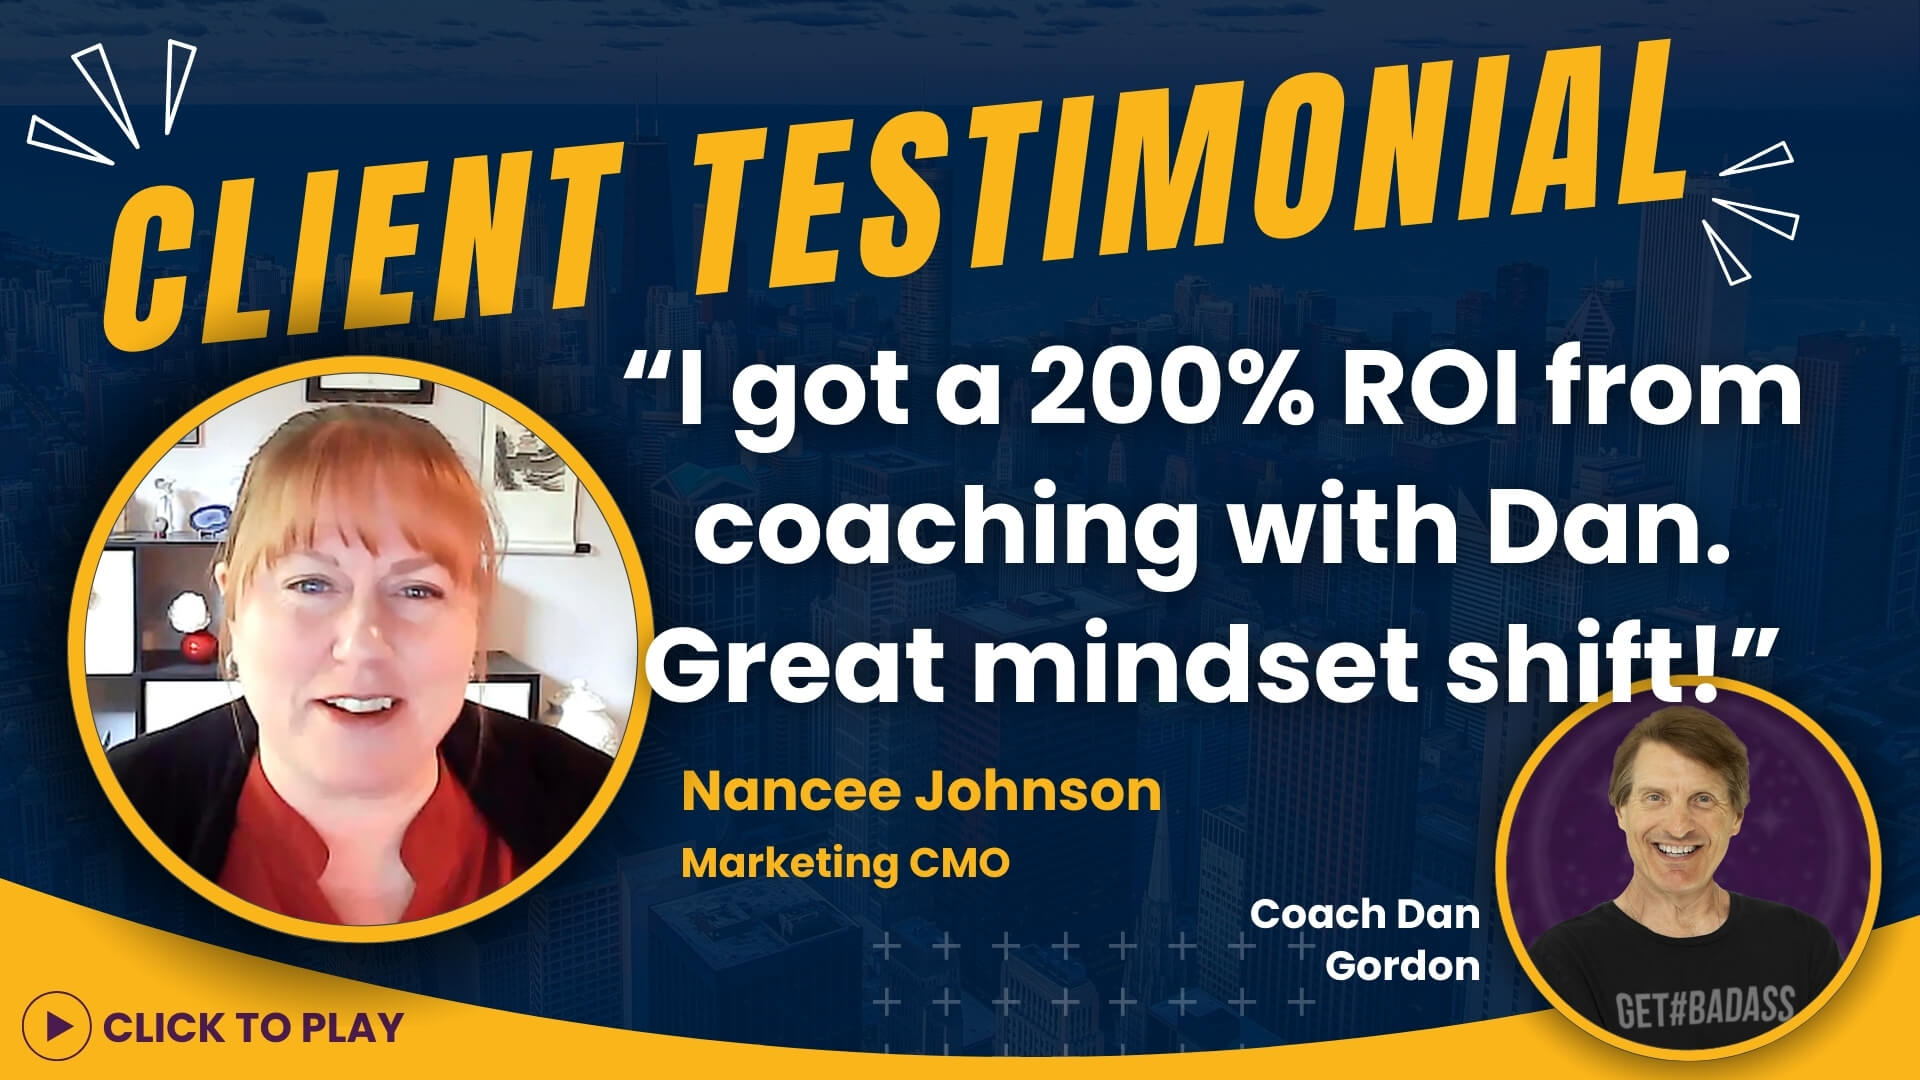 Nancee Johnson, a Fractional CMO, shares her successful experience with Coach Dan Gordon's business coaching.